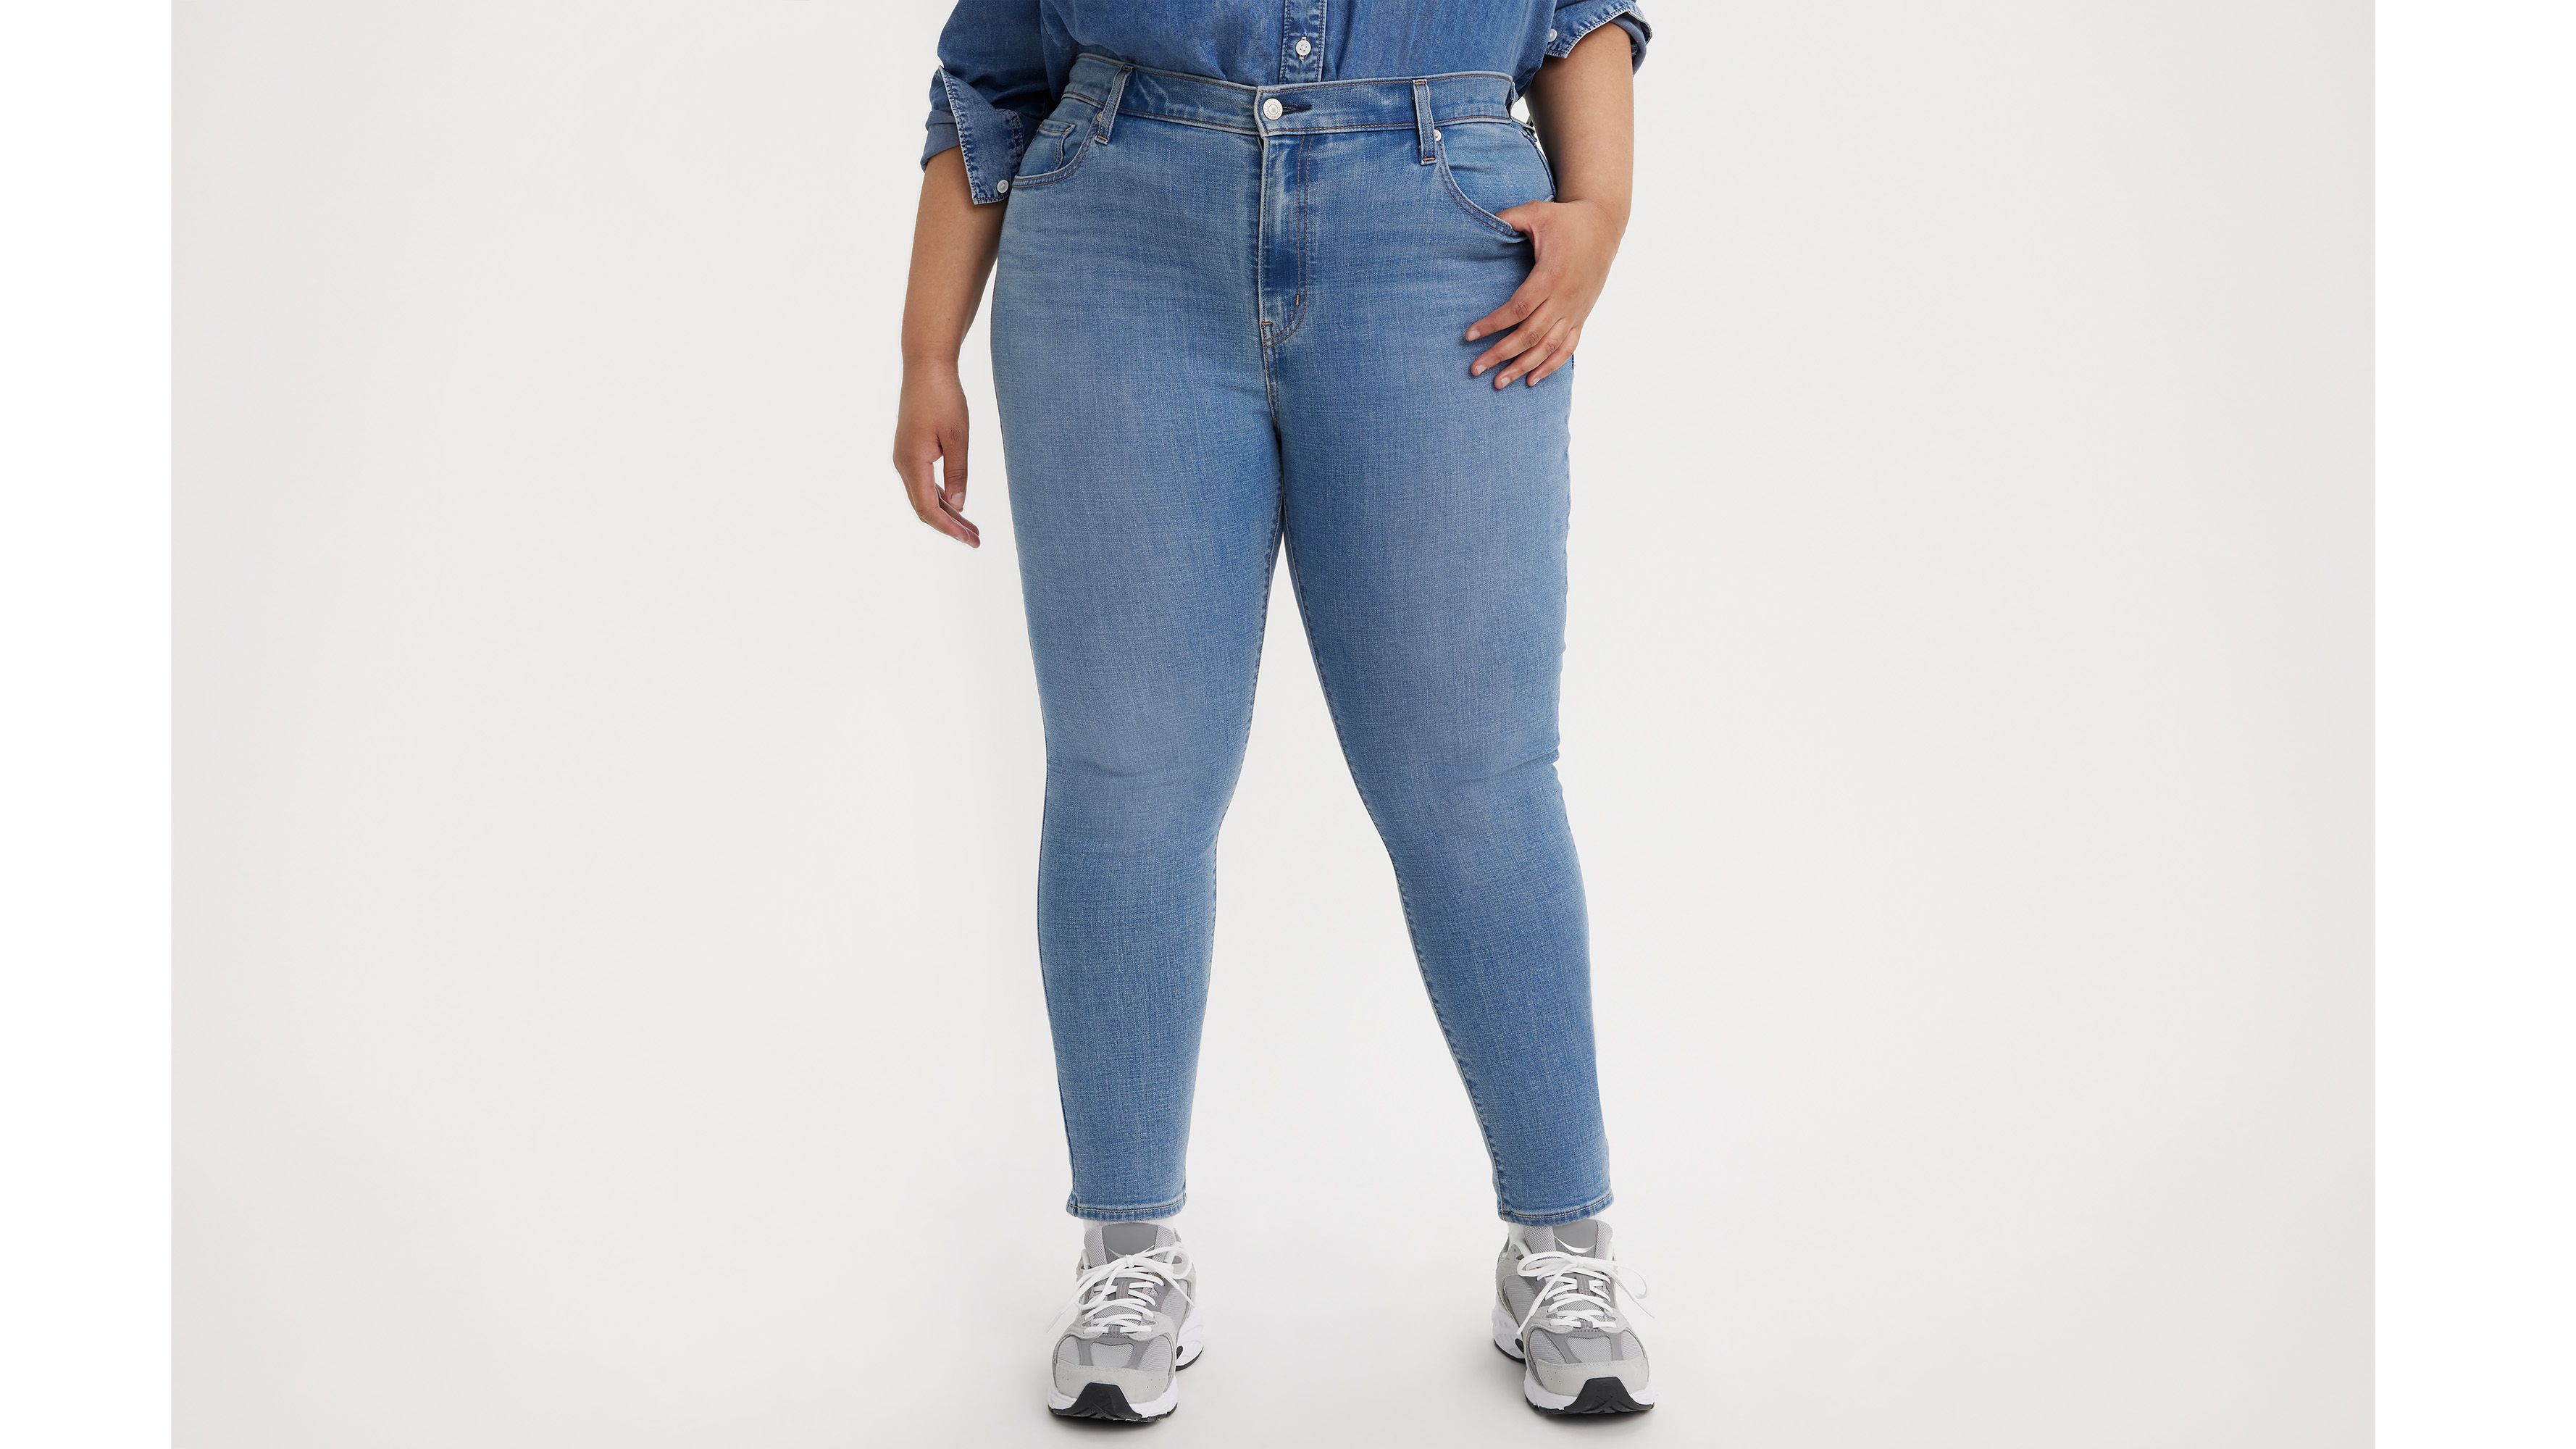 721 High Rise Skinny Women's Jeans (Plus Size)